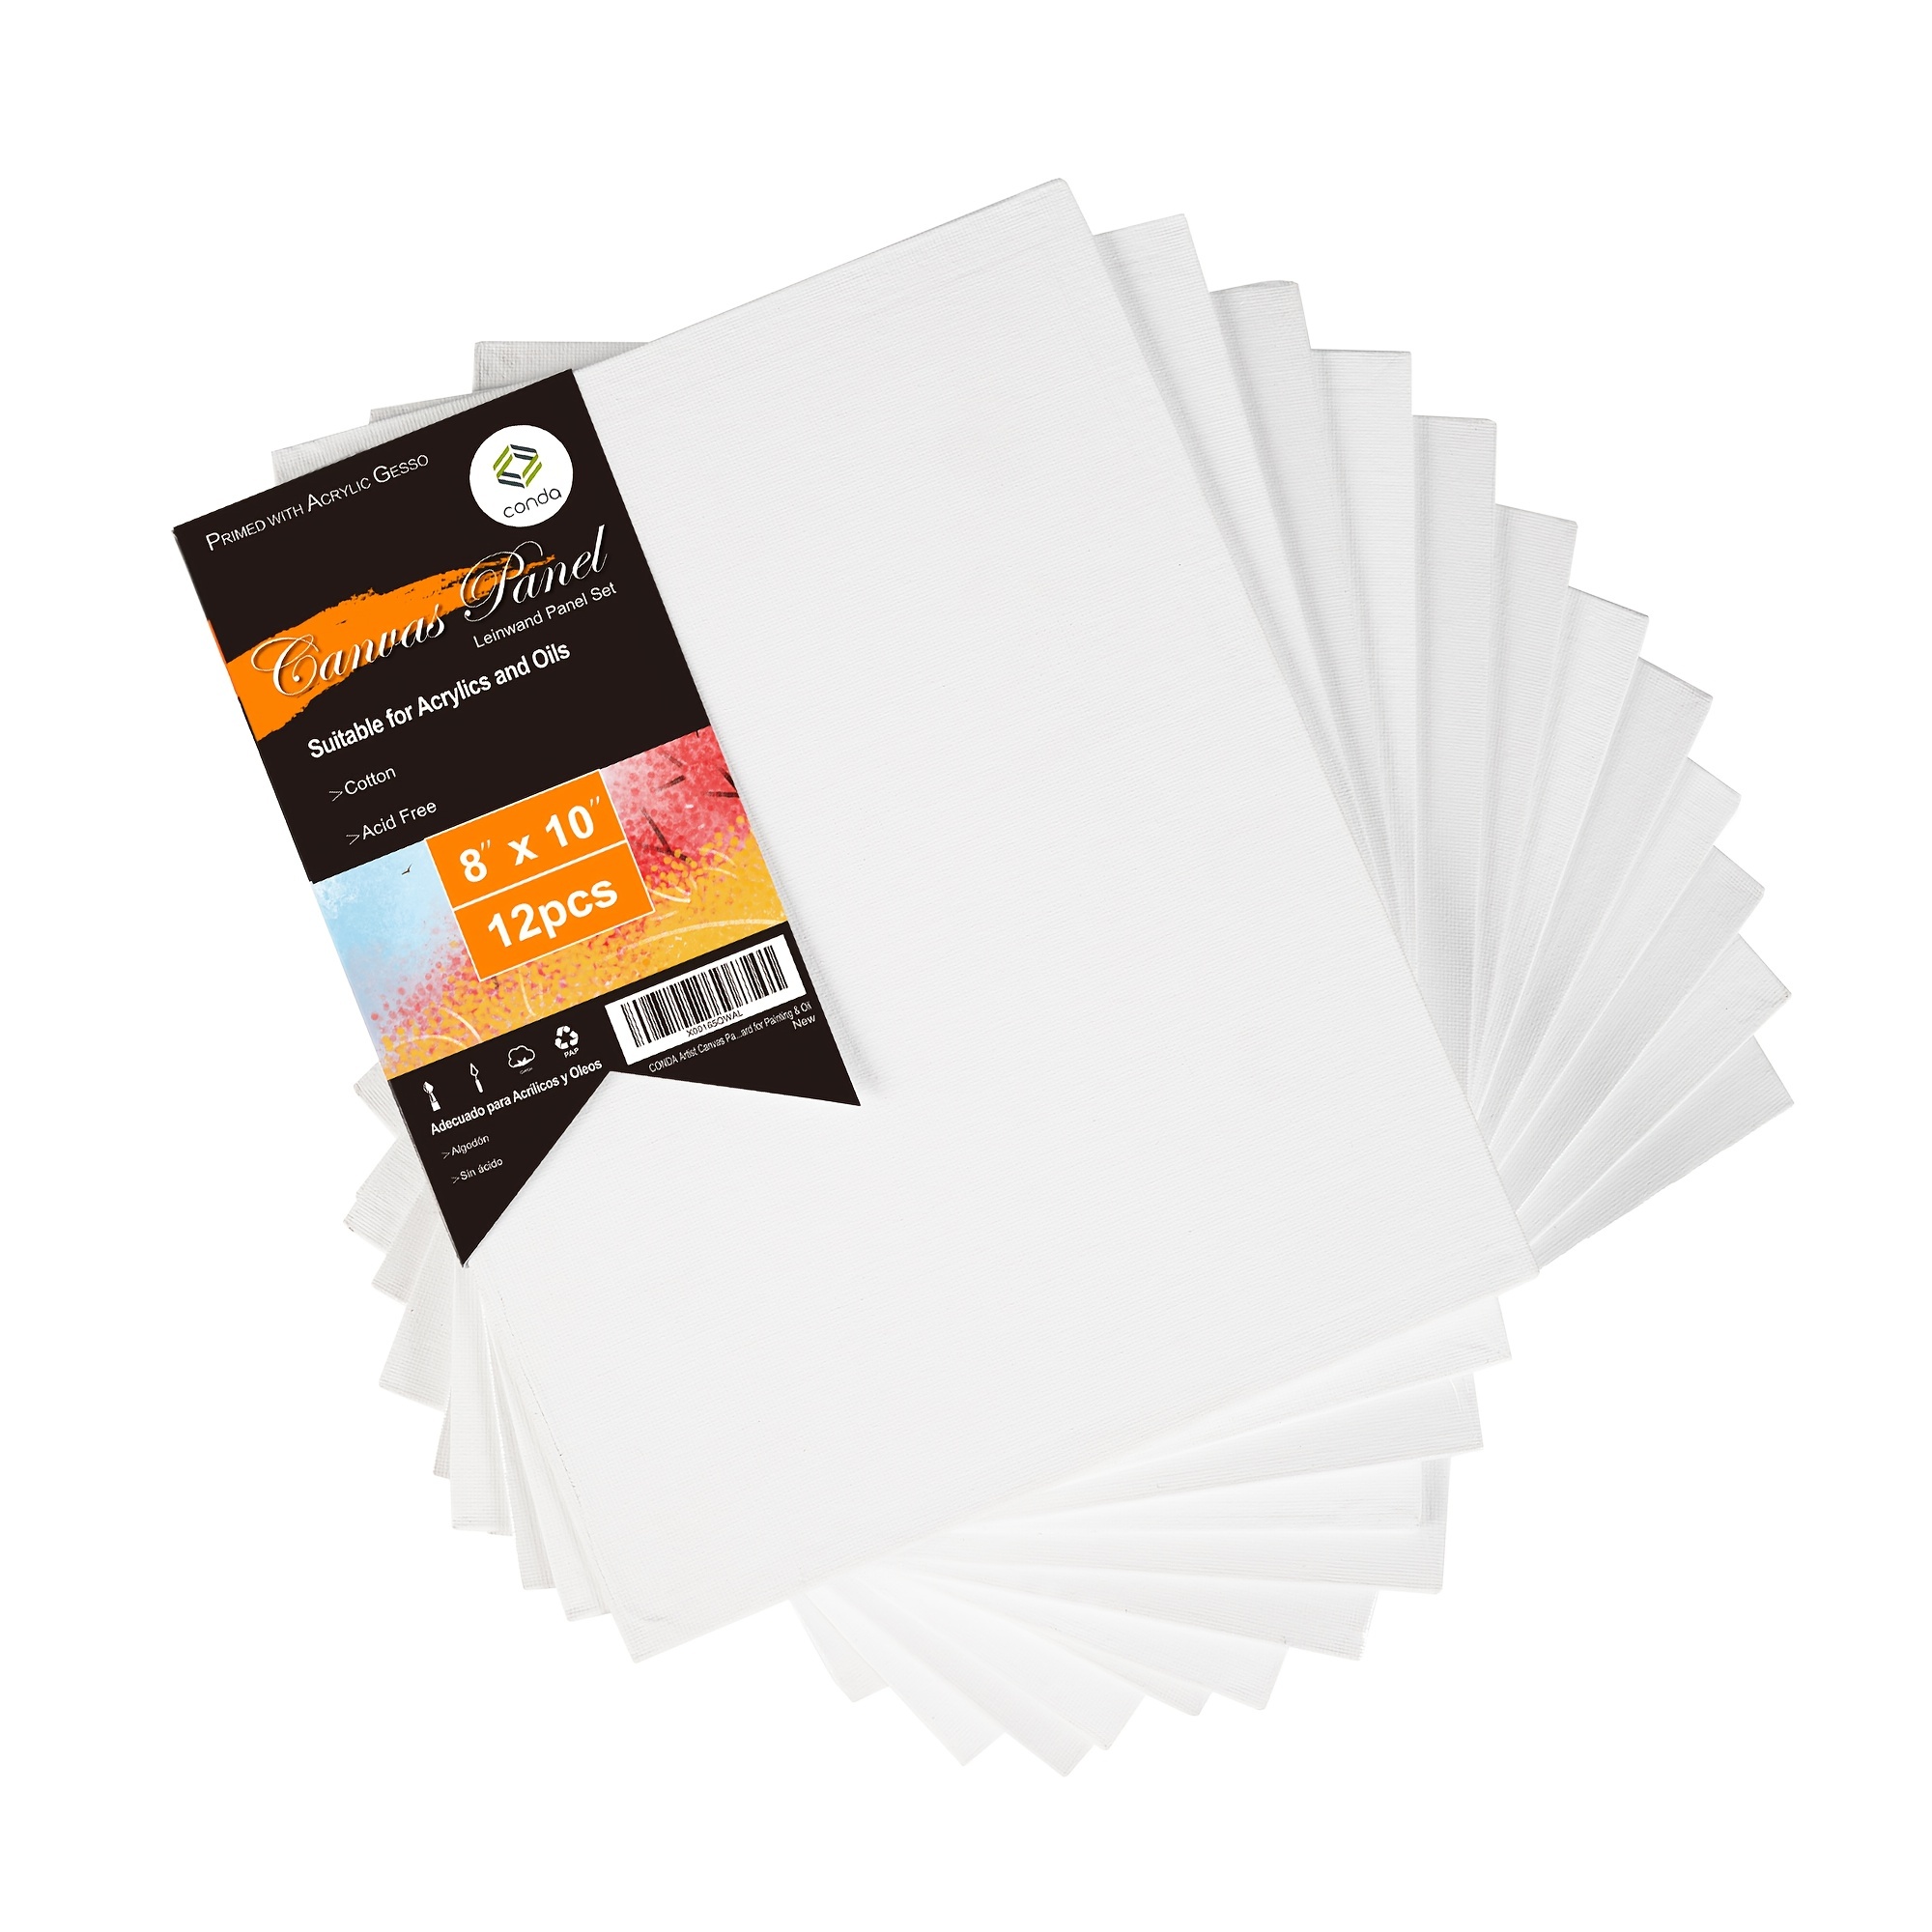 Stretched Canvases for Painting 12 Pack 5x7, 8x10, 9x12, 11x14 inch, 100% Cotton 12.3 oz Triple Primed Painting Canvas, 3/4 Profile Acid-Free Art